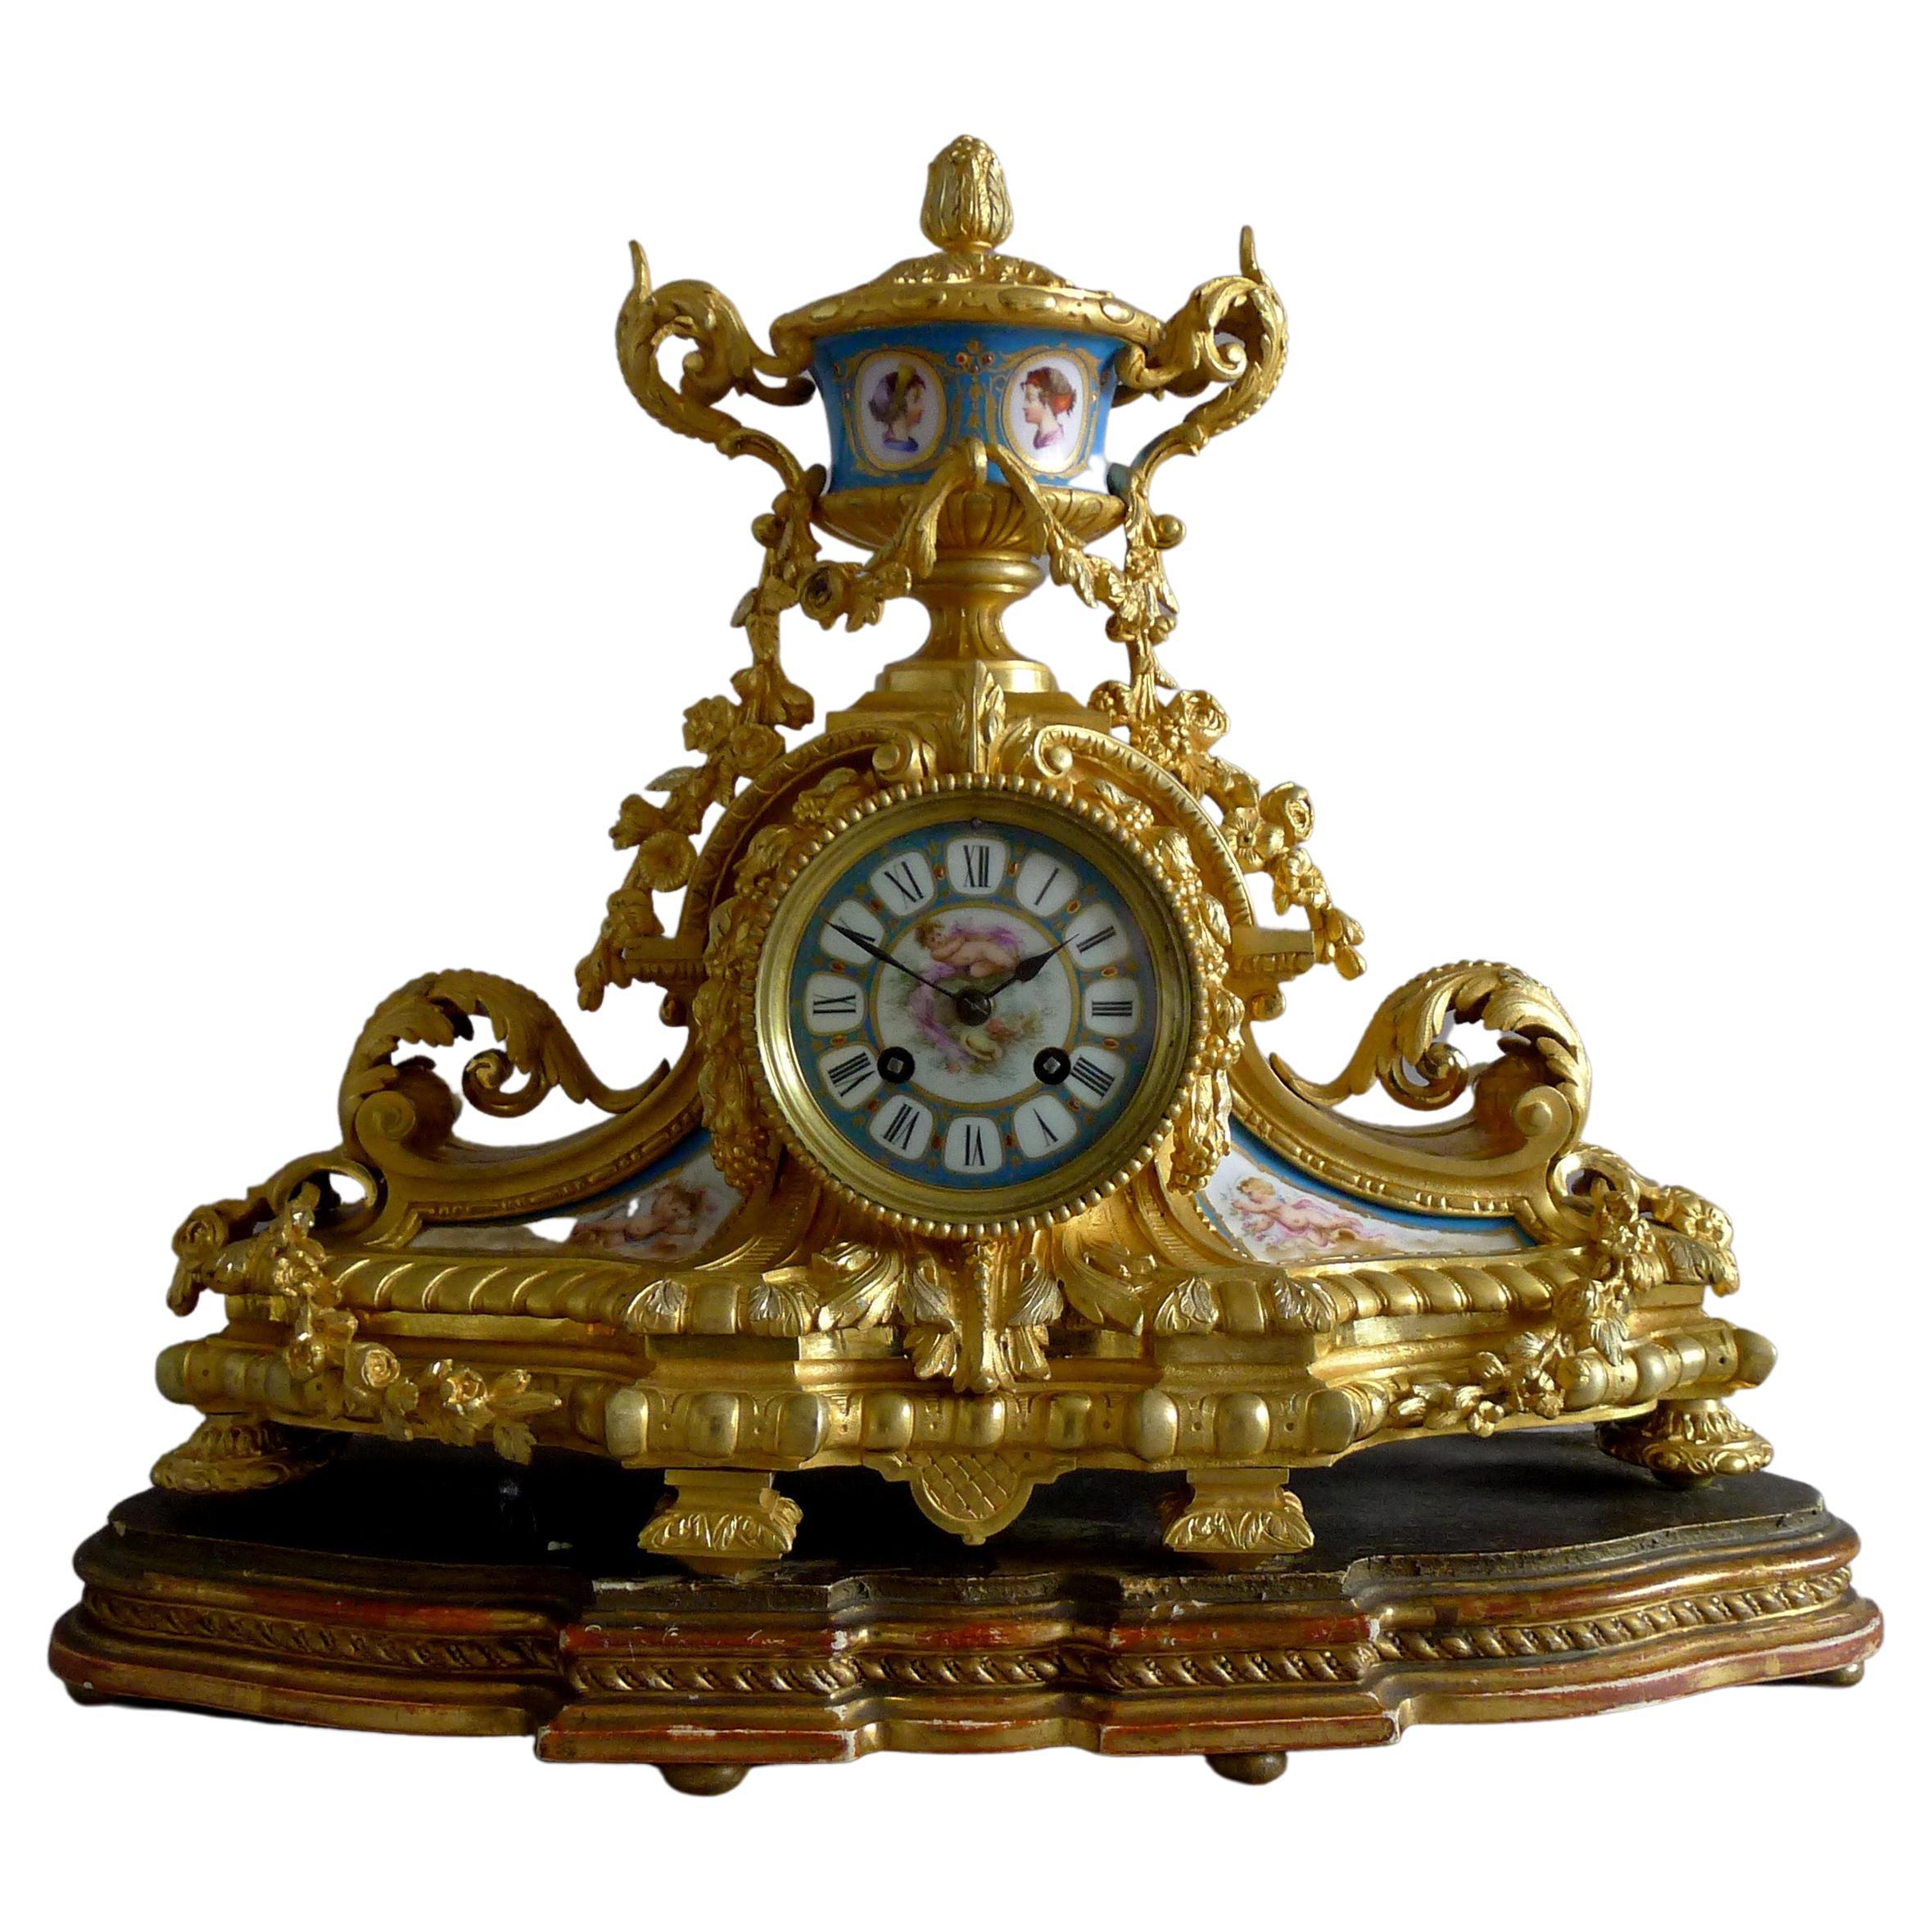 French porcelain and ormolu mantel clock with silver highlights mantel clock